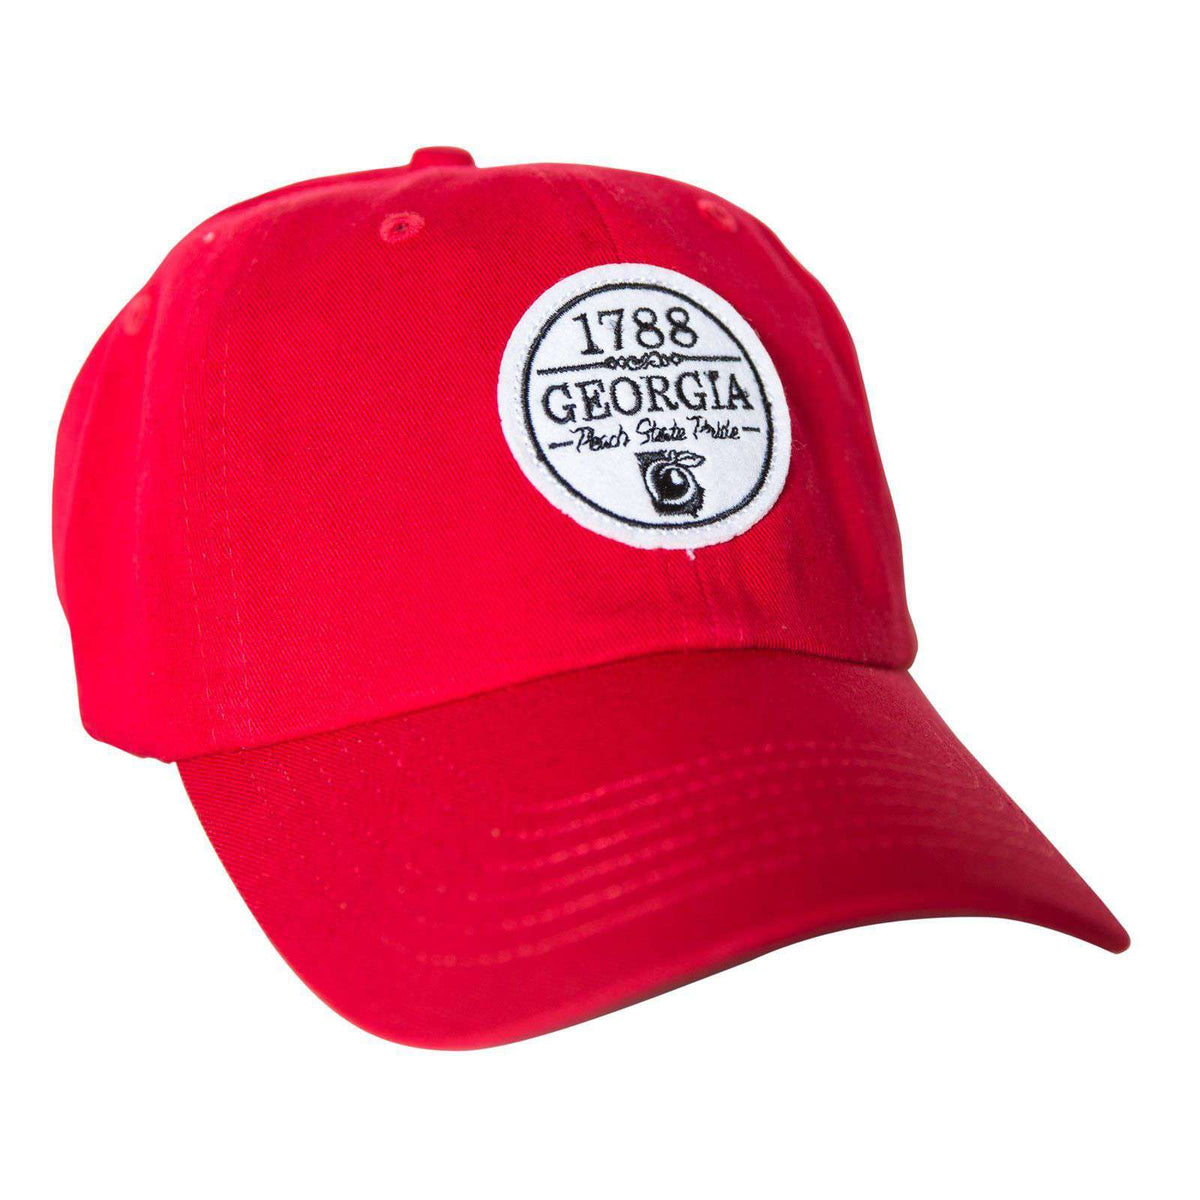 The Georgian Hat in Nantucket Red by Peach State Pride - Country Club Prep